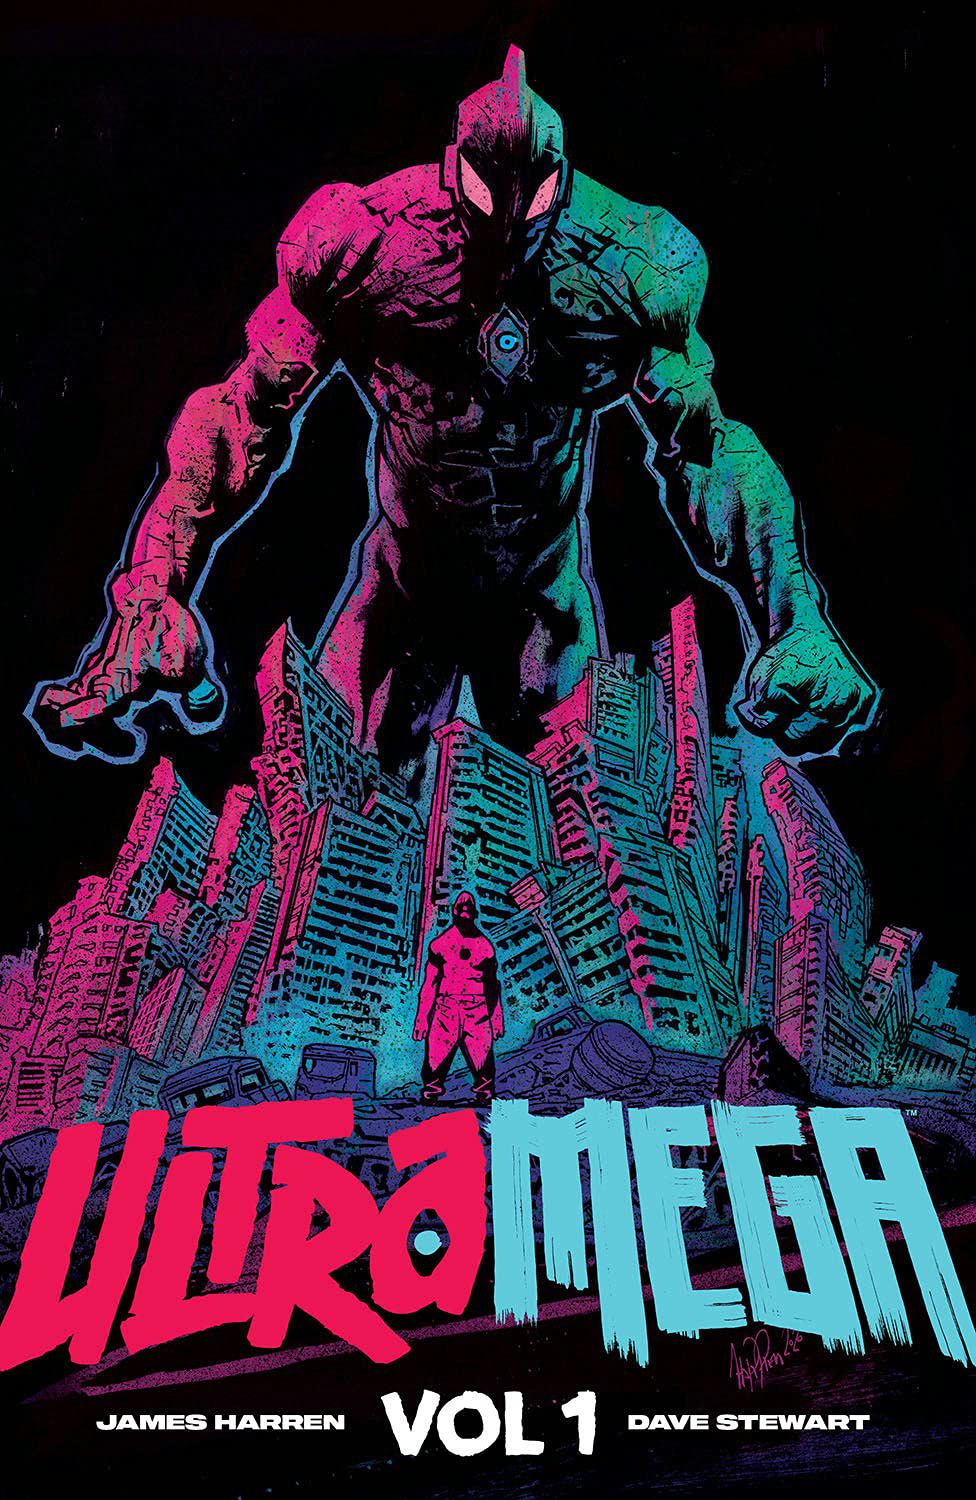 The tokusatsu-style hero Ultramega towers over crooked city buildings and his human alterego, a pouchy middle-aged mustachioed man on the cover of Ultramega Vol. 1. 